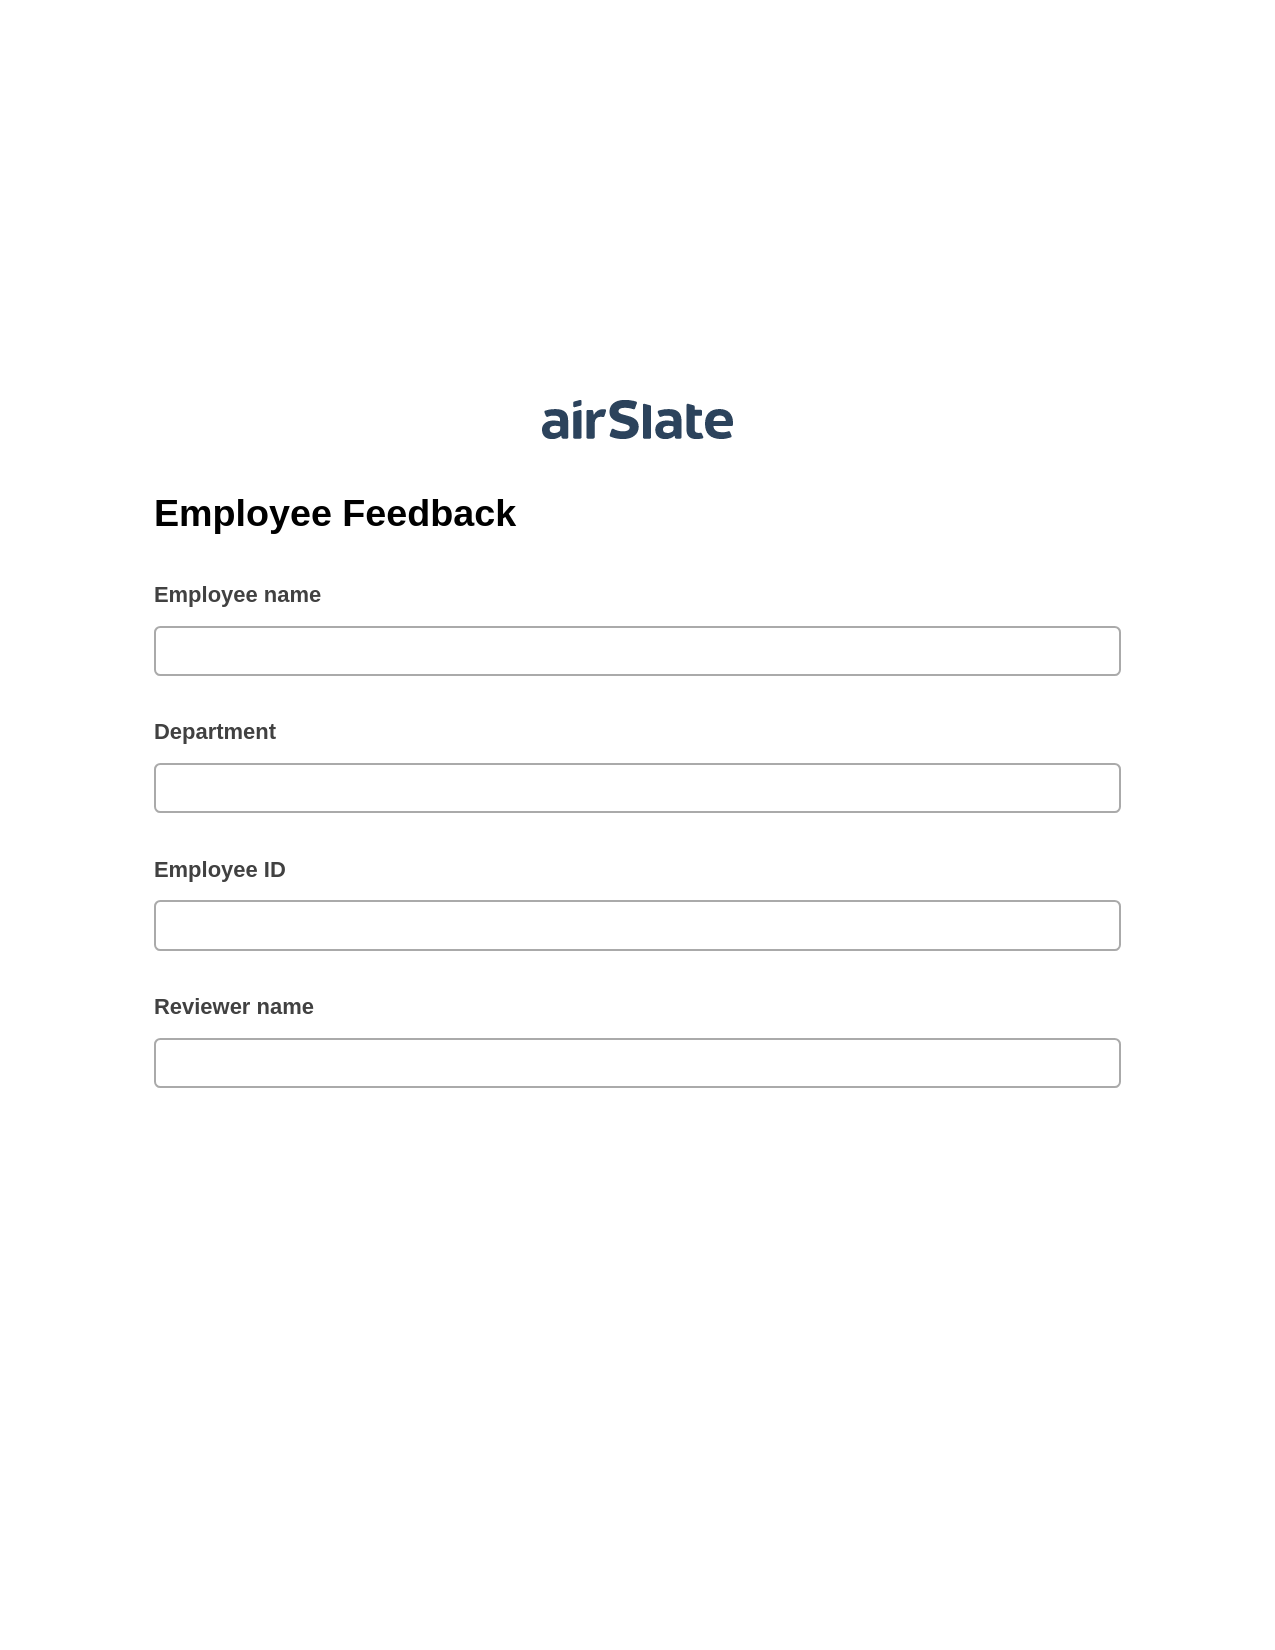 Employee Feedback Pre-fill from Salesforce Record Bot, Webhook Bot, Archive to SharePoint Folder Bot